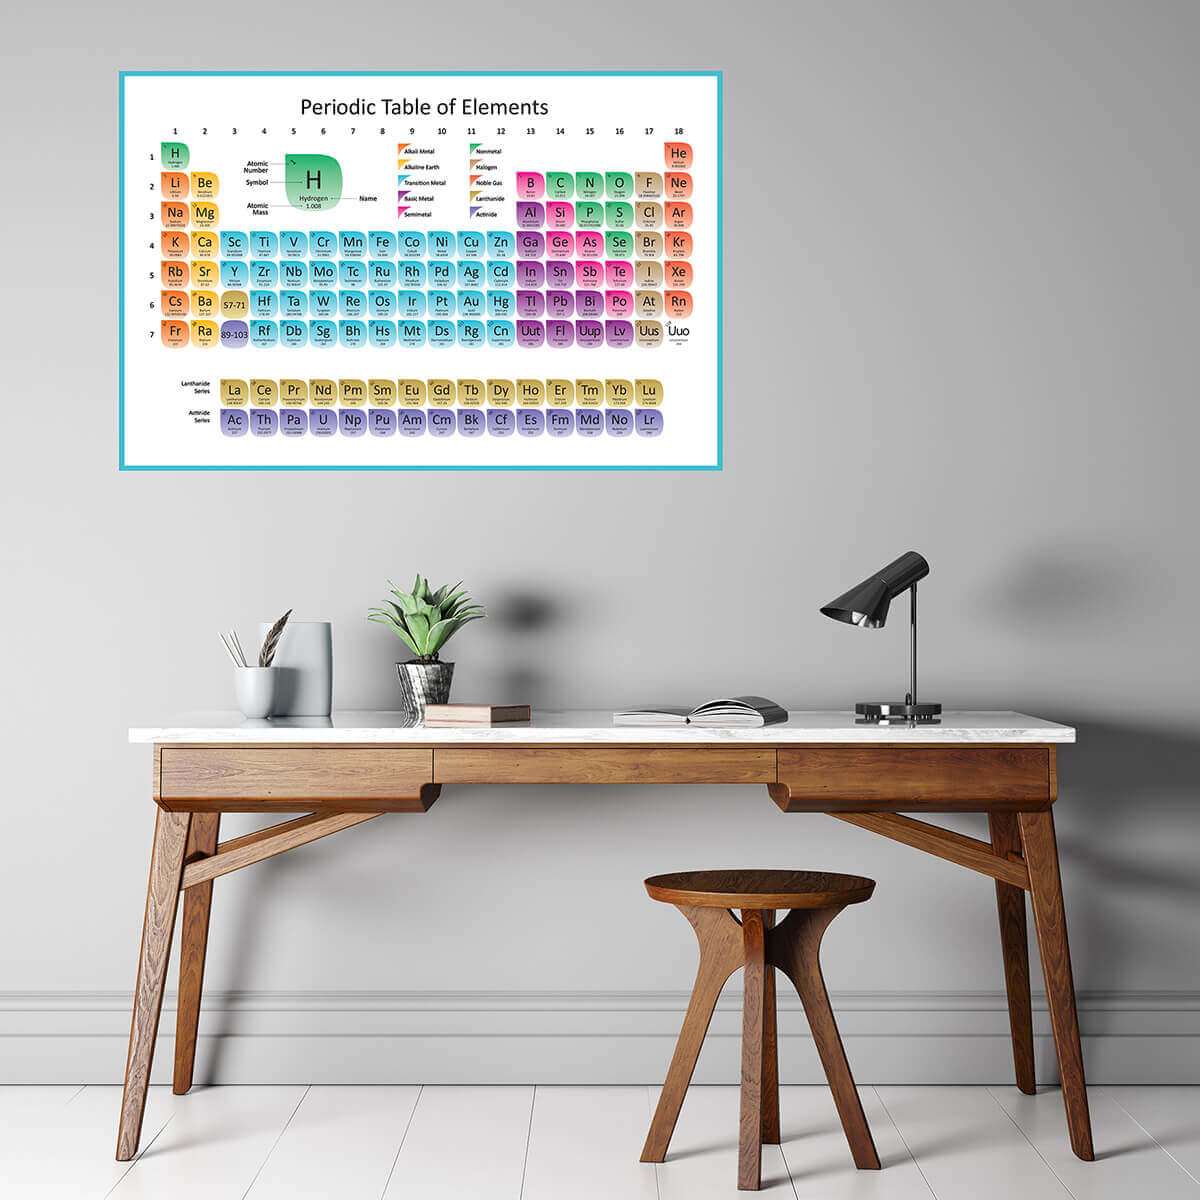 Periodic Table of Elements Wall Sticker